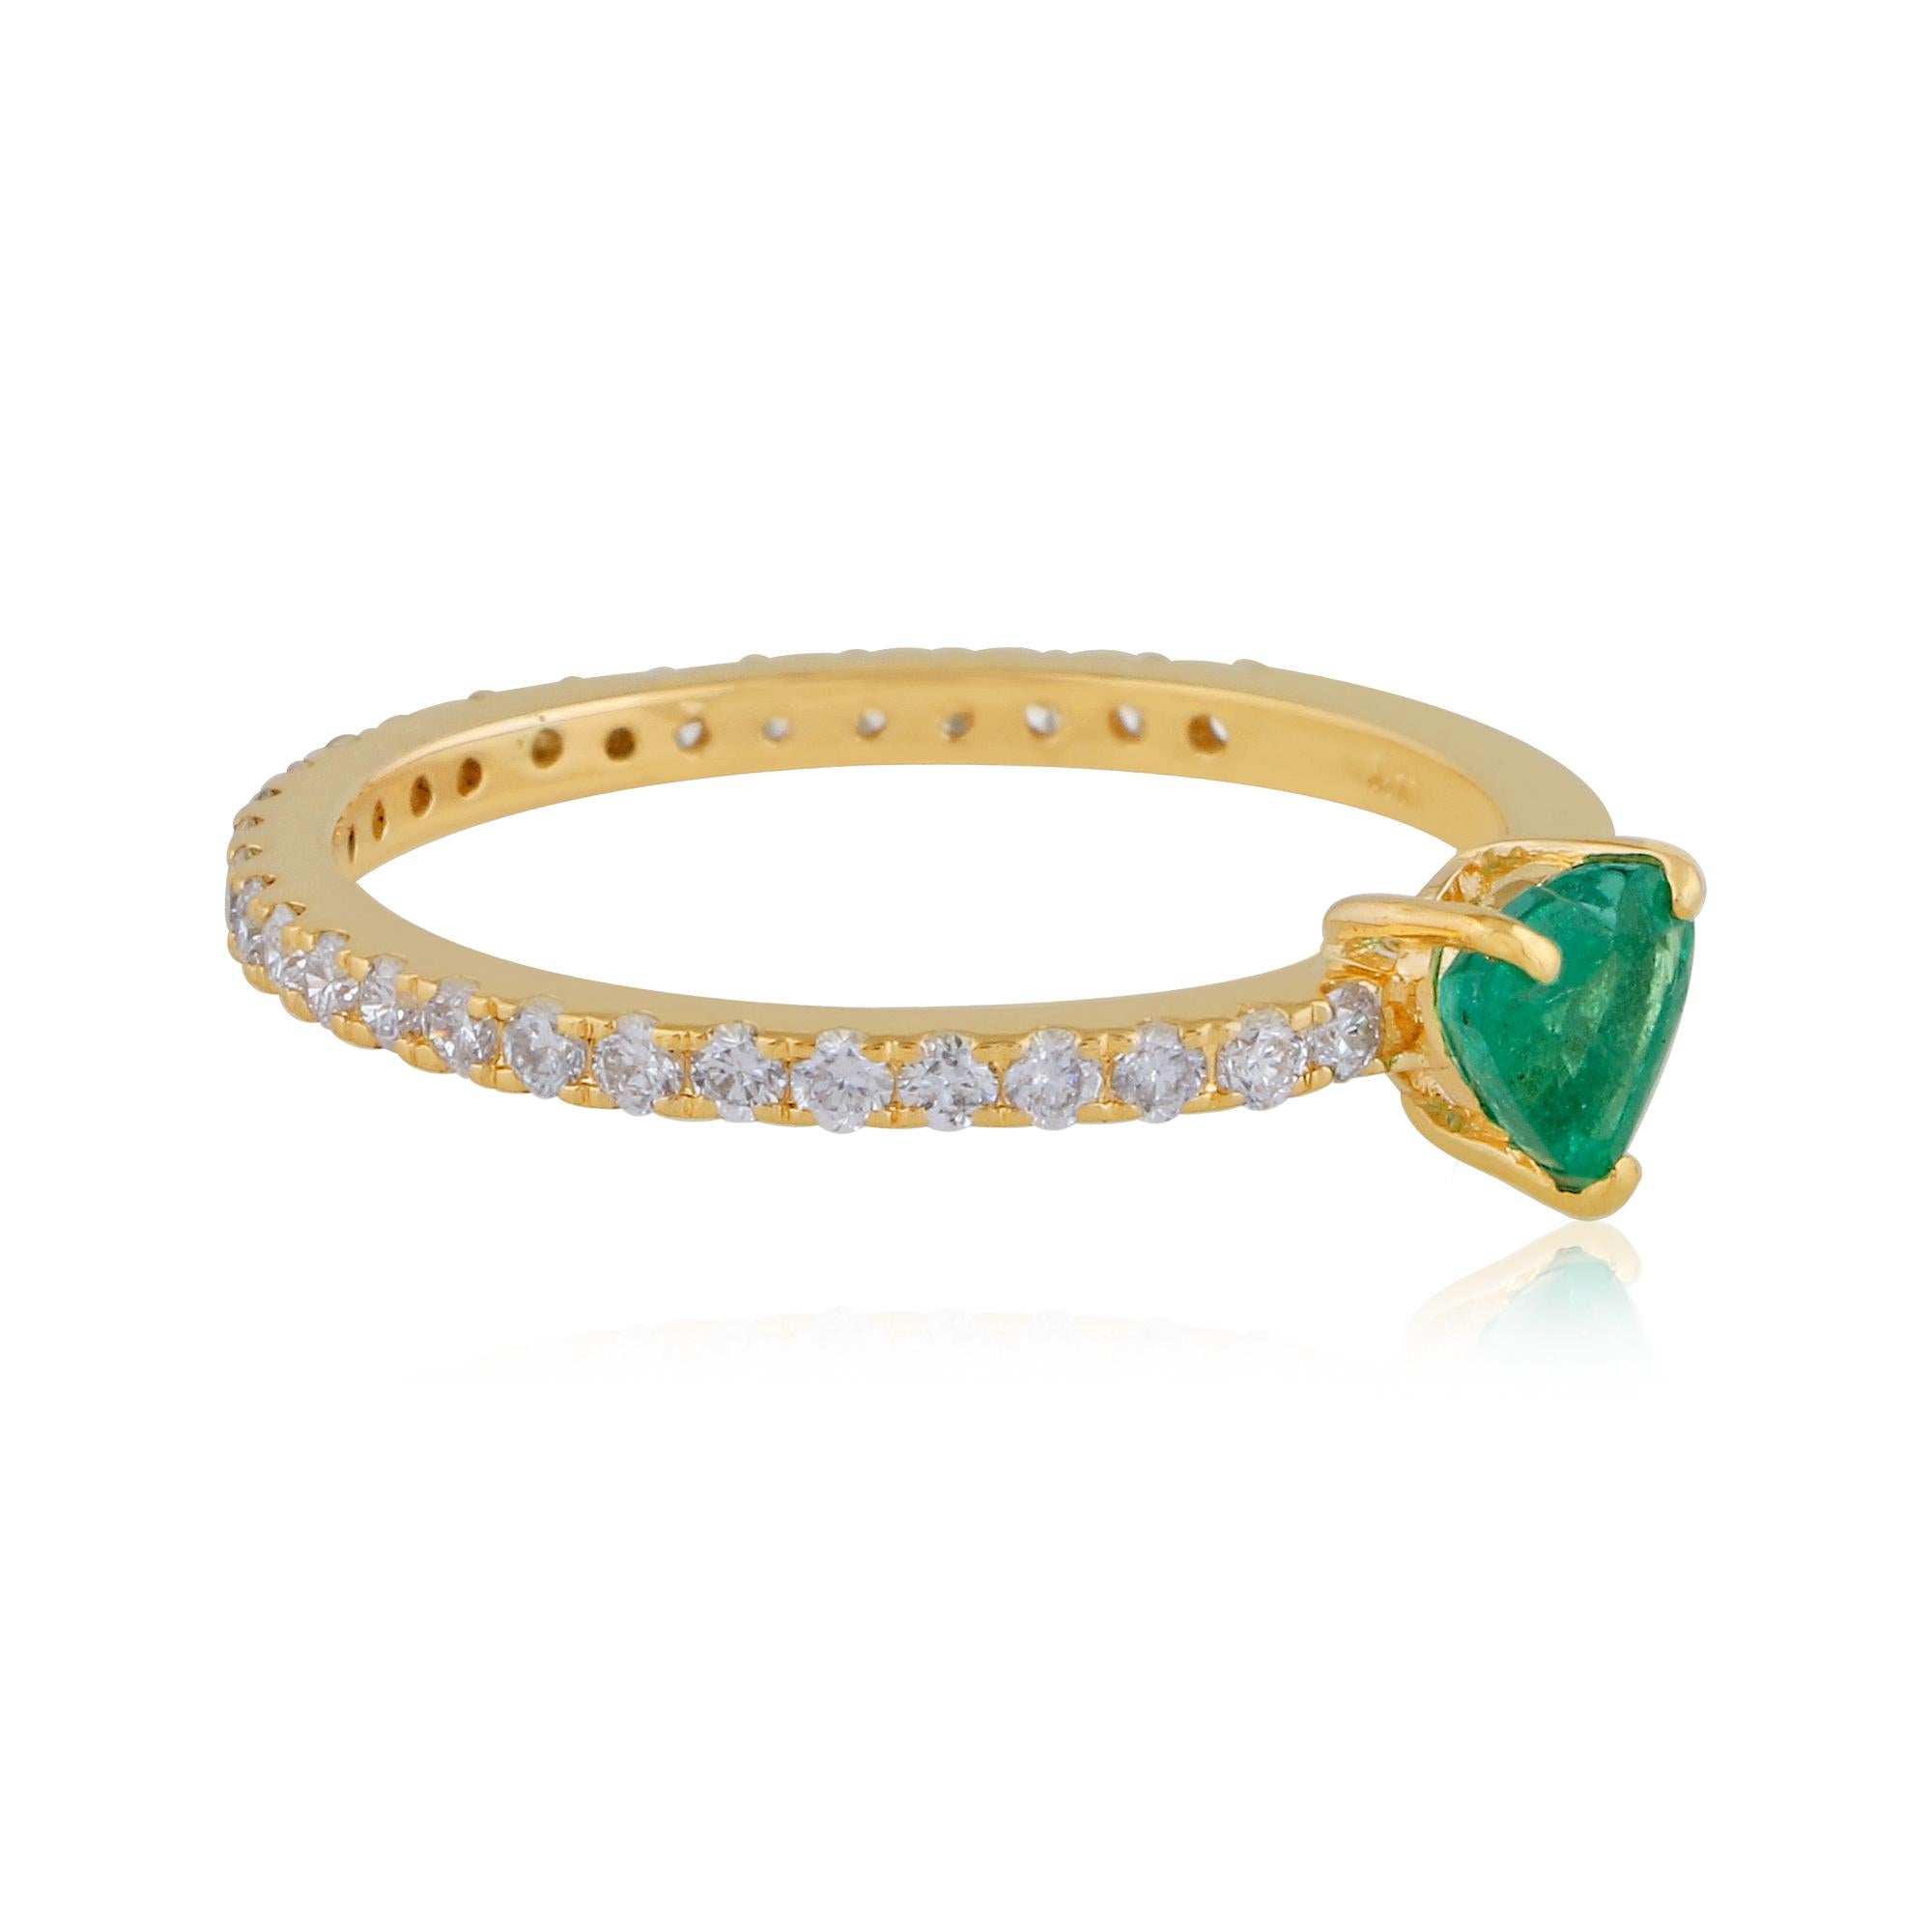 The heart-shaped emerald gemstone is the central focal point of the ring and represents love and affection. The emerald is carefully selected for its quality, including considerations of color, clarity, and carat weight. Its vibrant green color adds